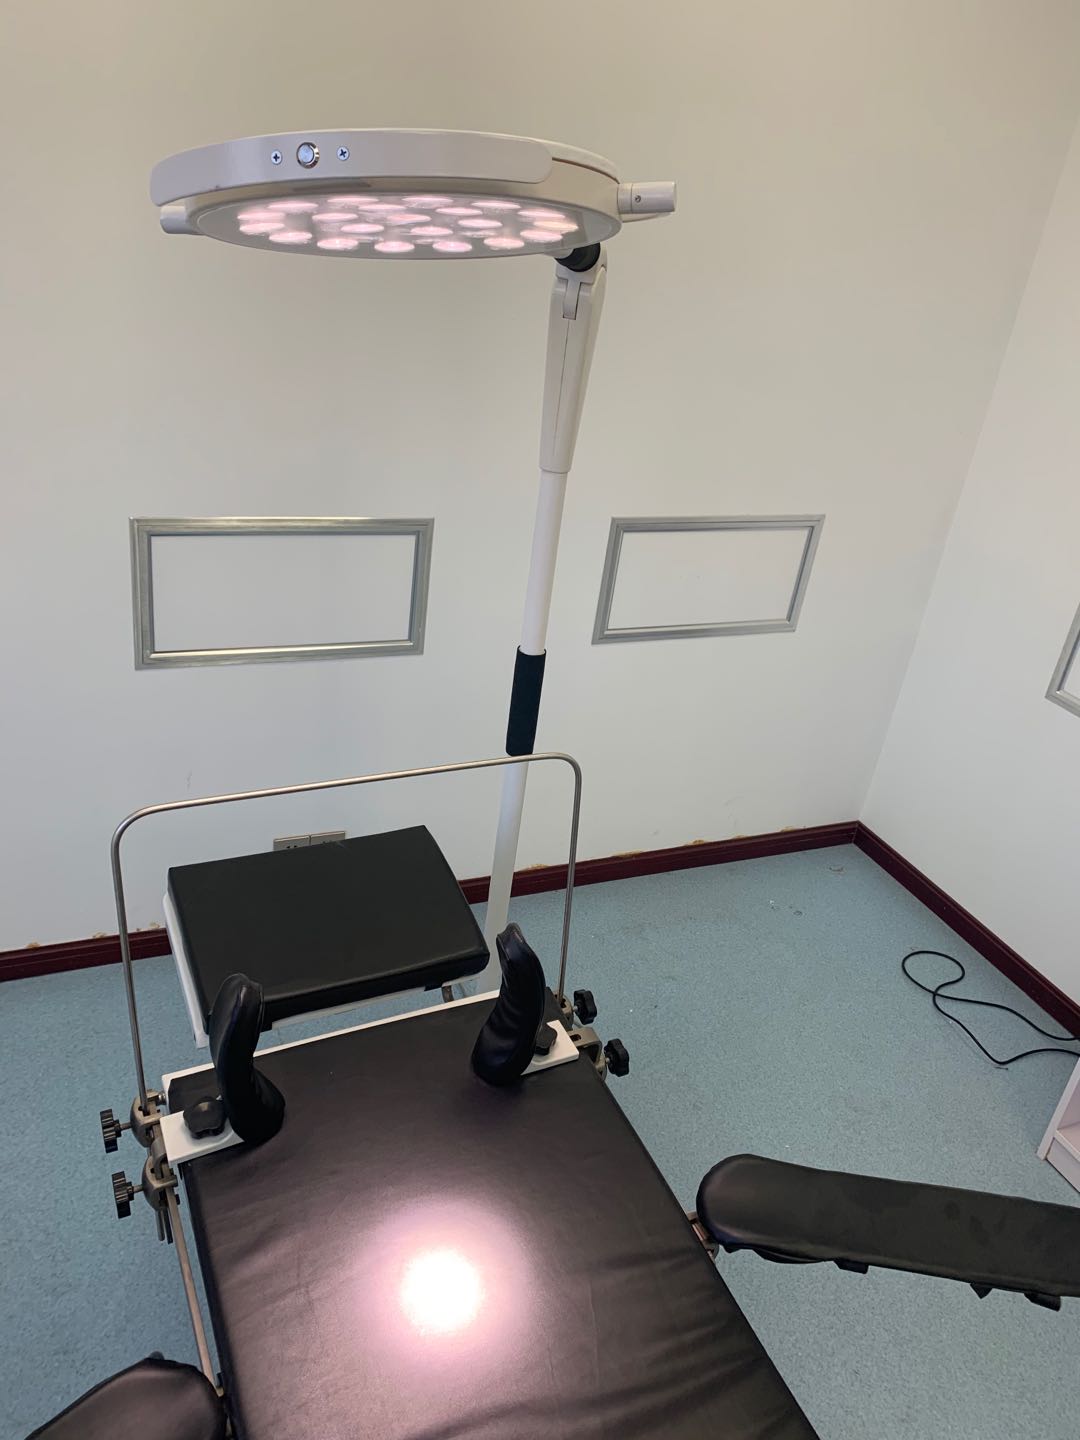 WYLEDL320 Remote Control Deep Cavity Hight Intensity LED Examination Light Floor Standing